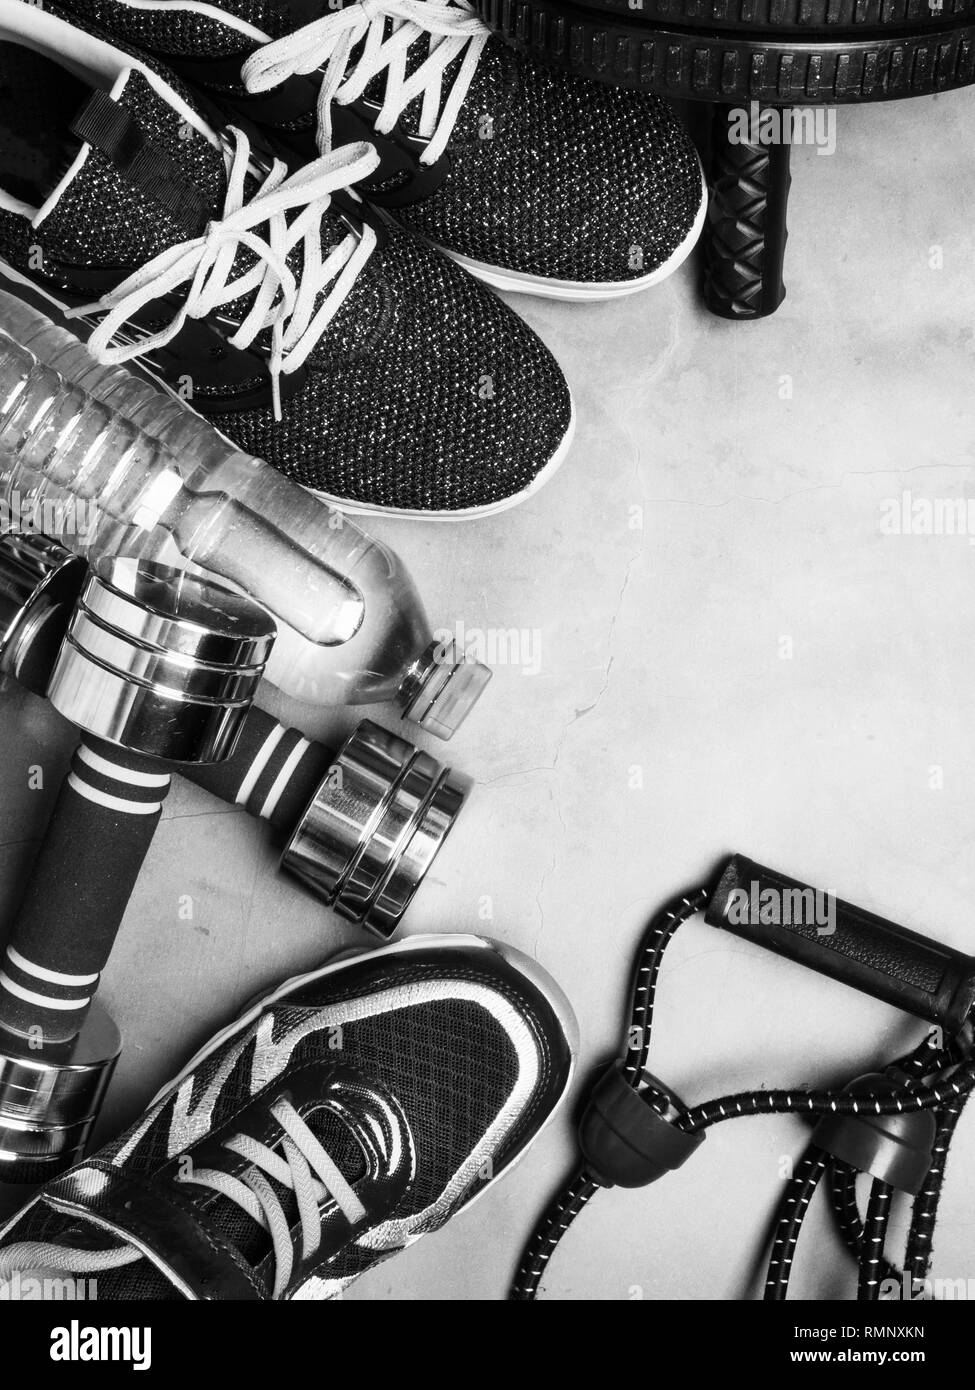 Top view image of sport shoes, dumbbells, press roll, water, expander. Fitness or workout equipment. Weight loss and sports concept with copy space Stock Photo